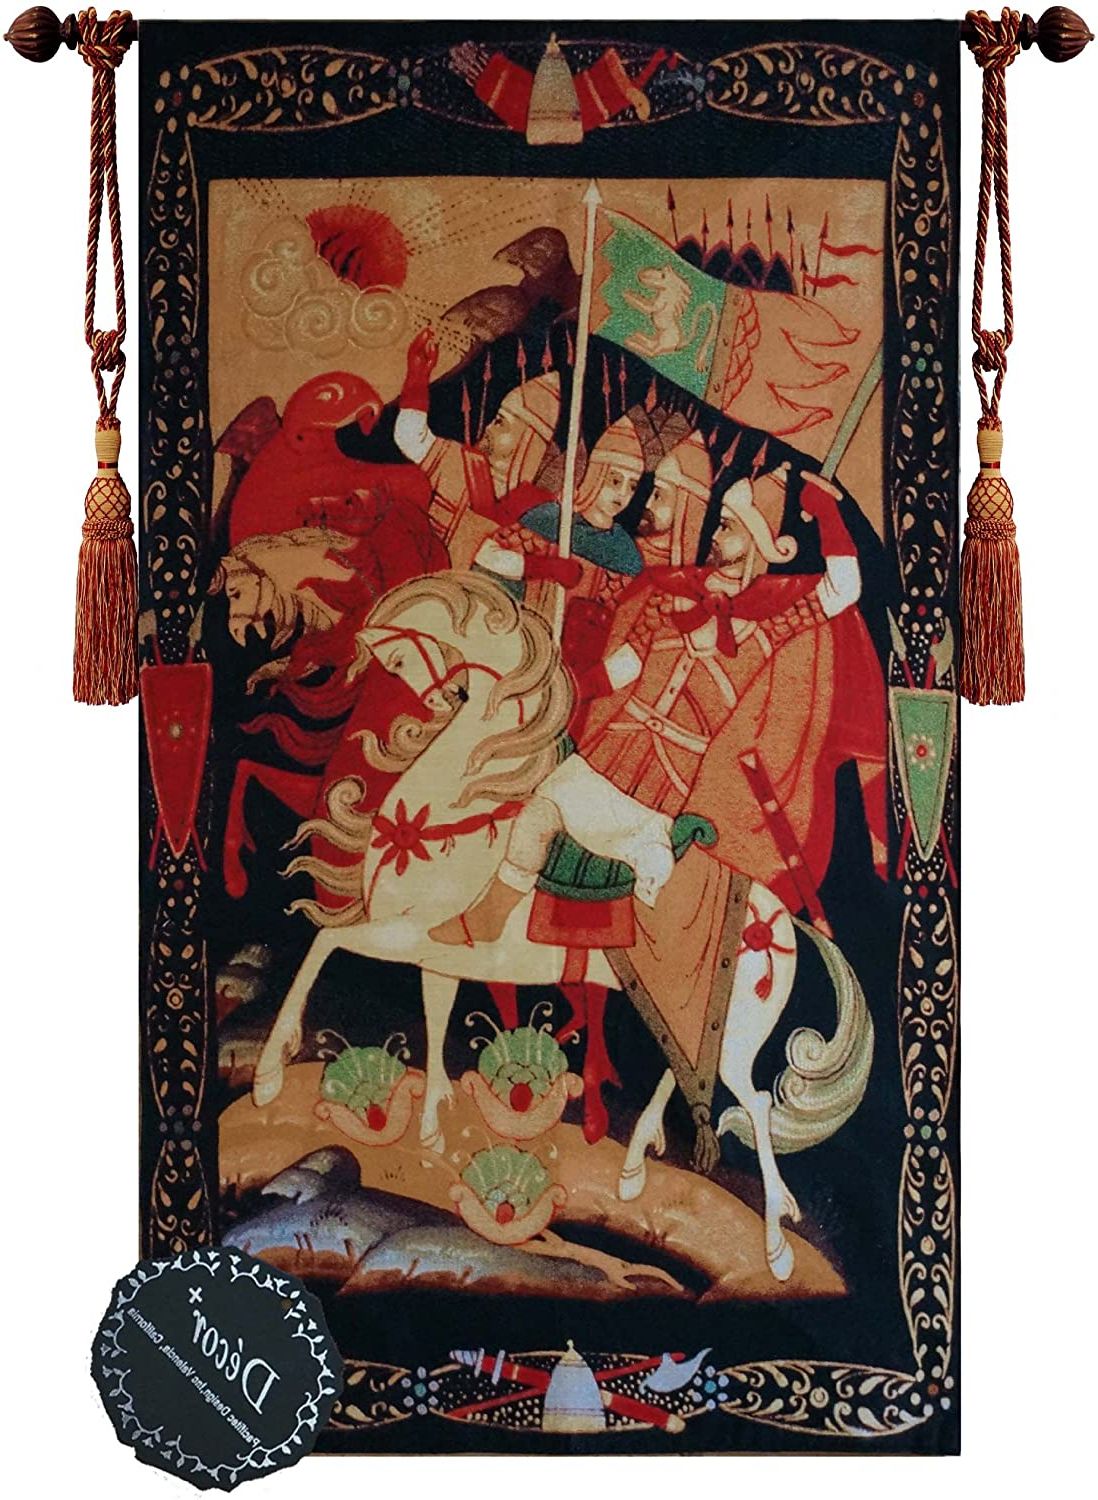 Beautiful Knights Of Crusade Fine Tapestry Jacquard Woven Wall Hanging Art  Decor Pertaining To 2019 Blended Fabric Godfrey Of Bouillon Wall Hangings (View 14 of 20)